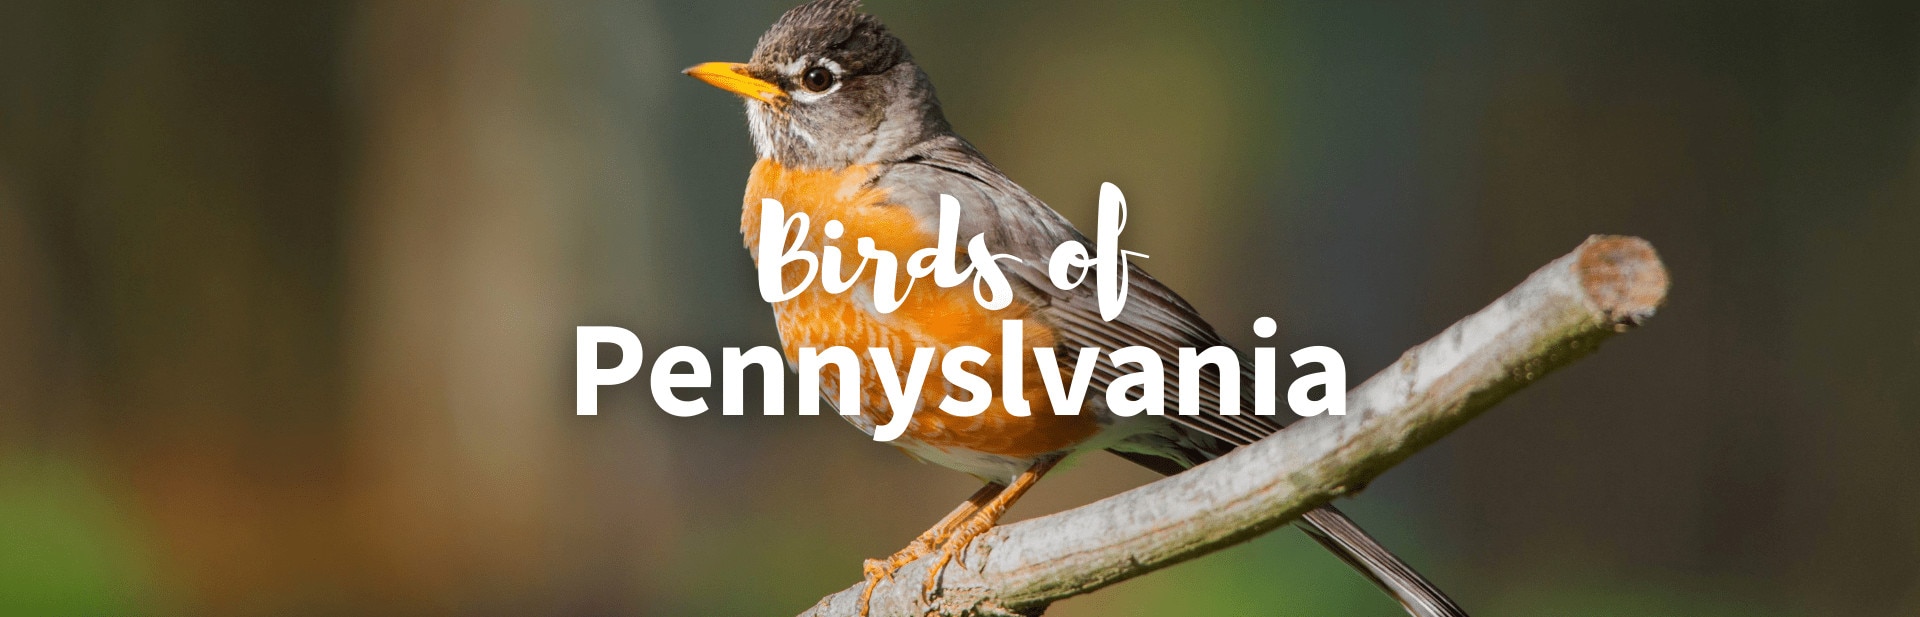 14 Amazing Birds Of Pennsylvania: Pictures and ID Guide with Facts